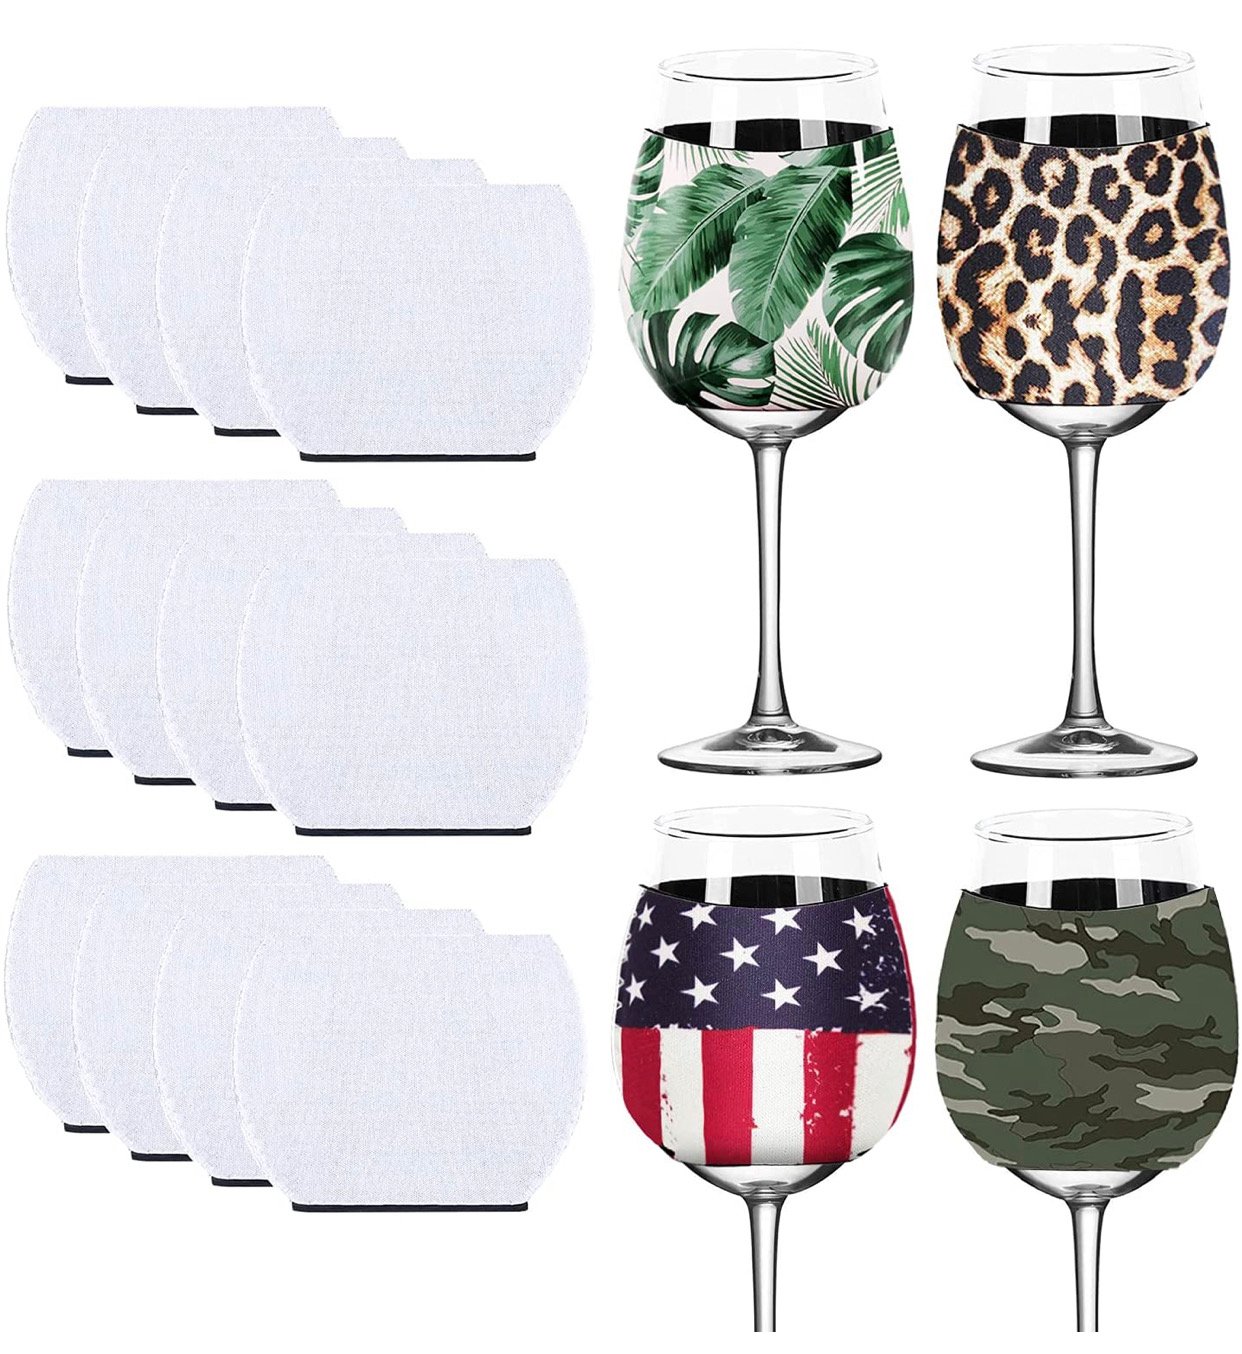 Image of Sublimation wine glass koozies 4 pack